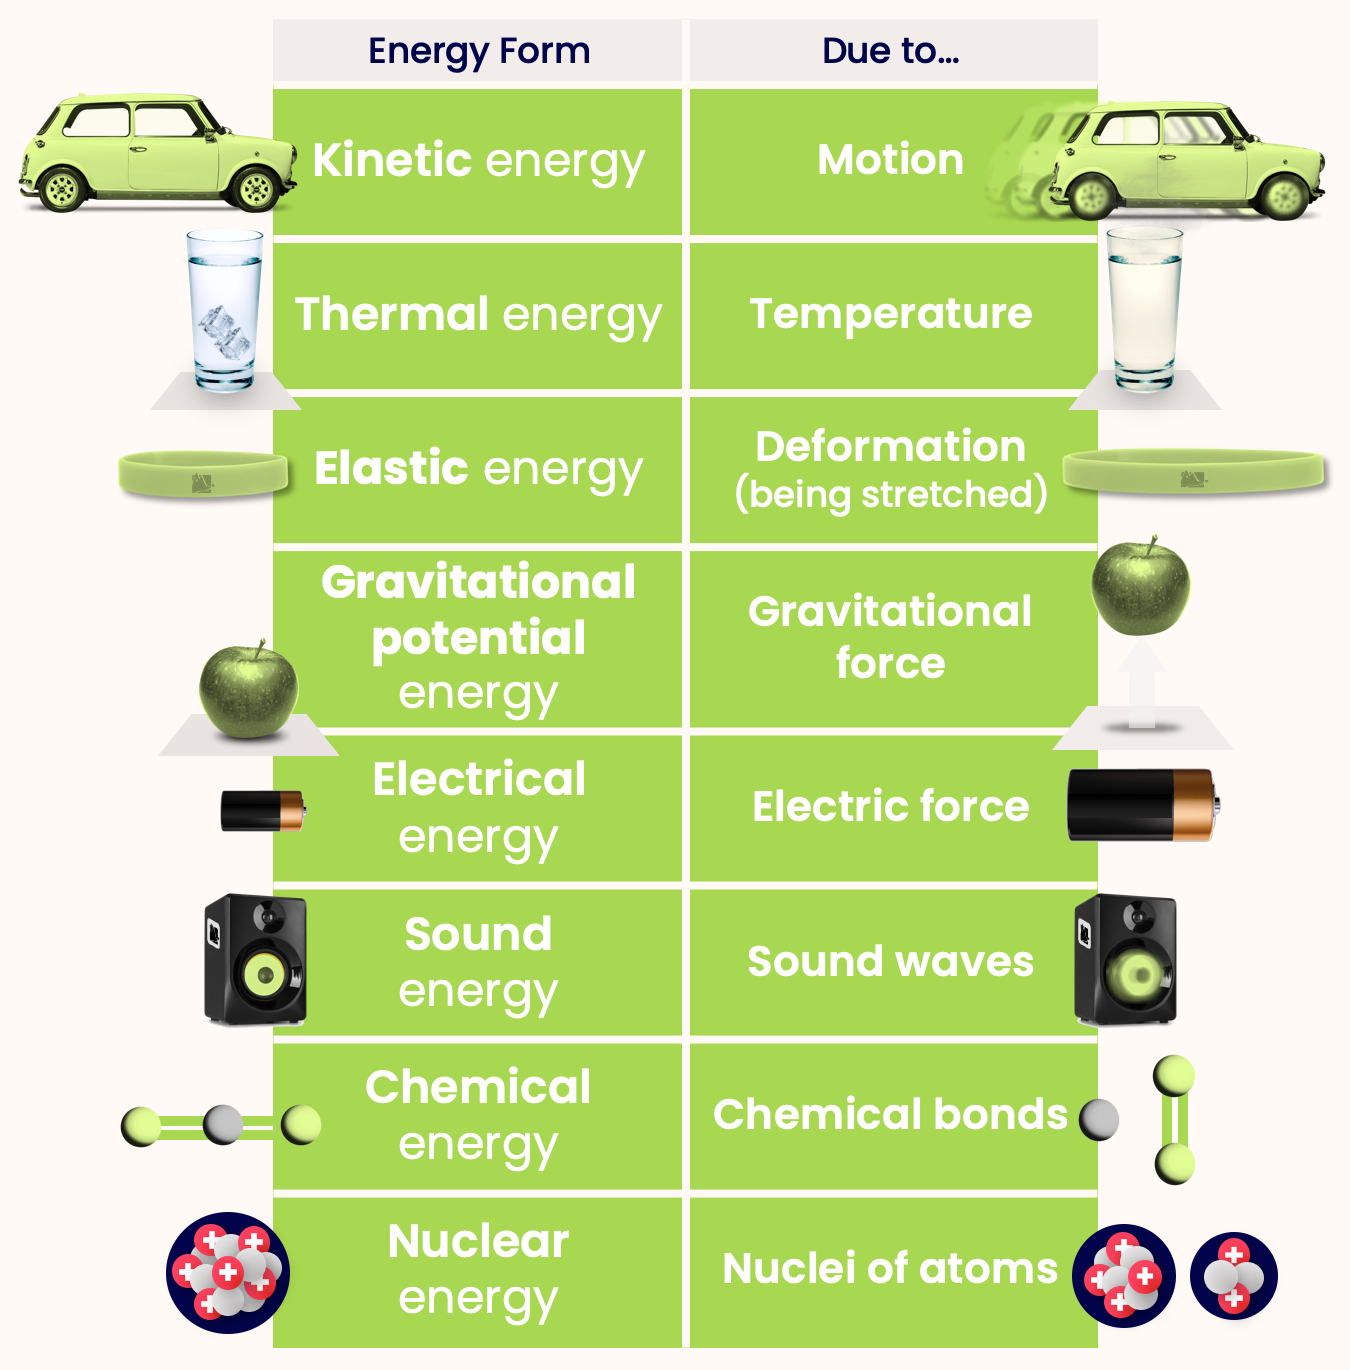 A list of energy forms: kinetic energy, thermal energy, elastic energy, gravitational potential energy, electrical energy, sound energy, chemical energy, nuclear energy